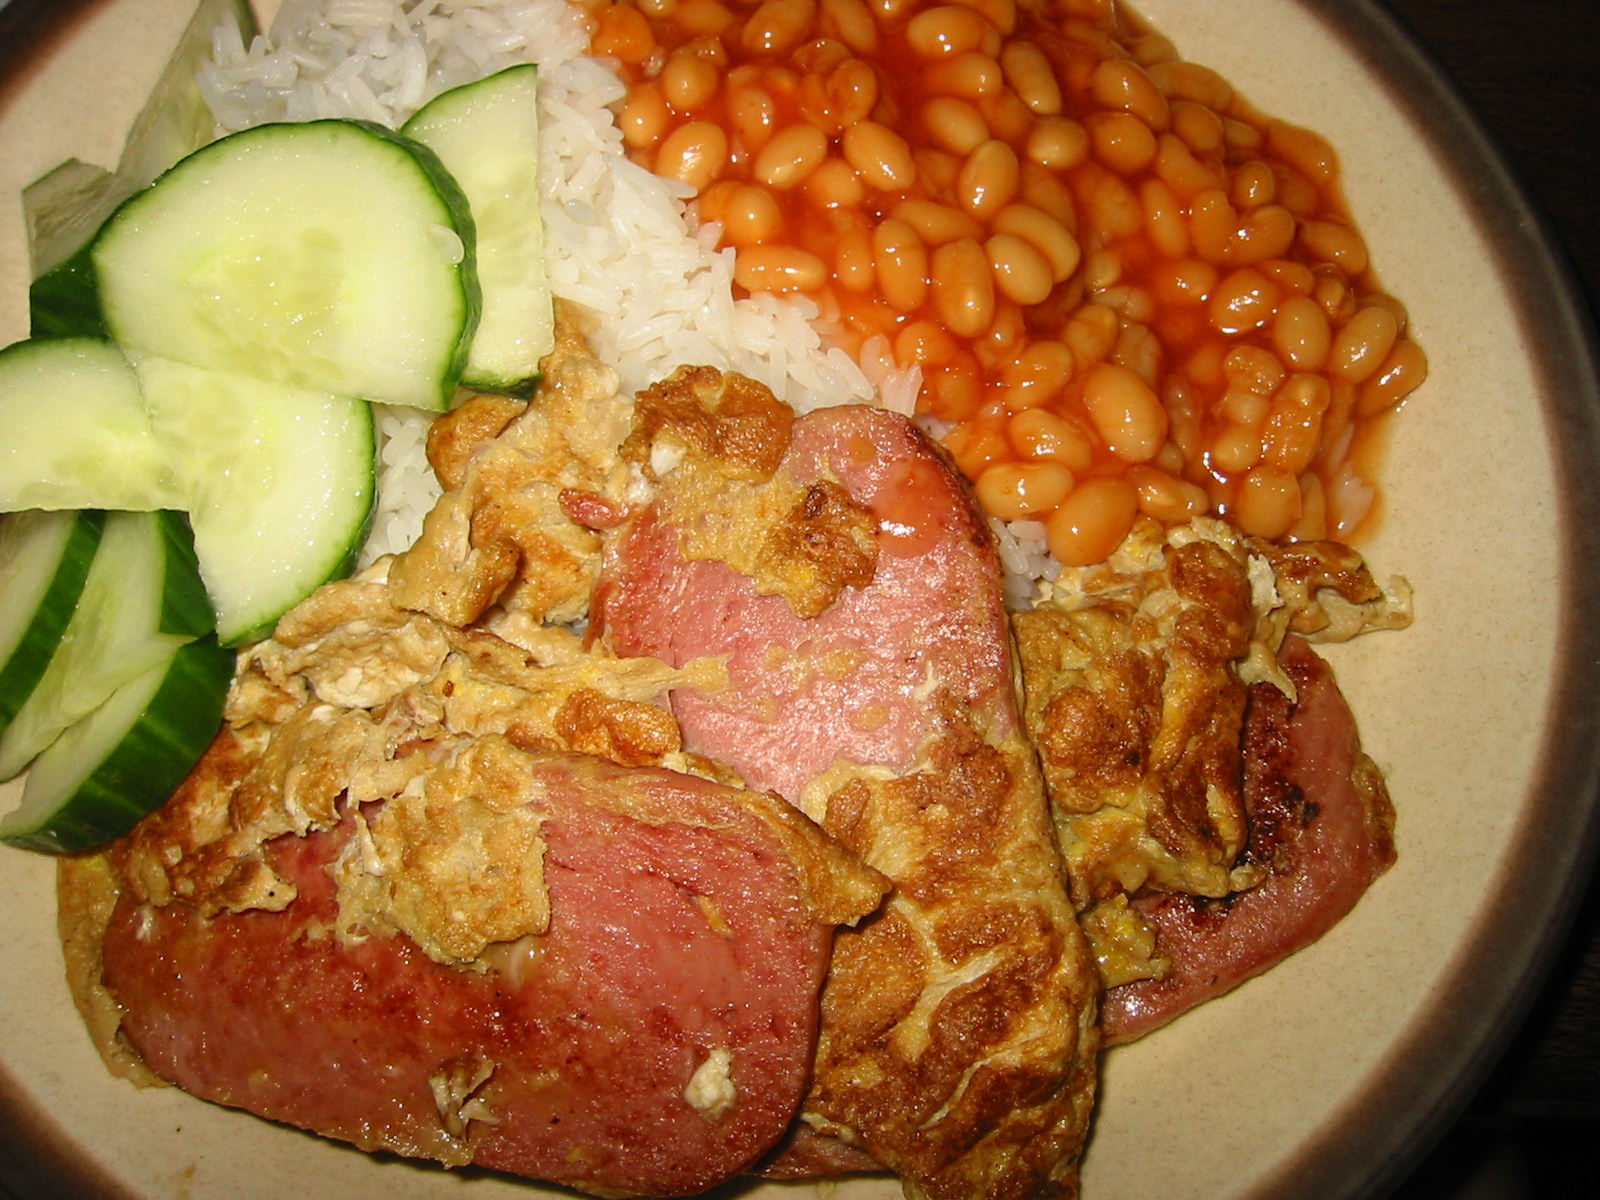 SPAM and egg, rice, baked beans and cucumber